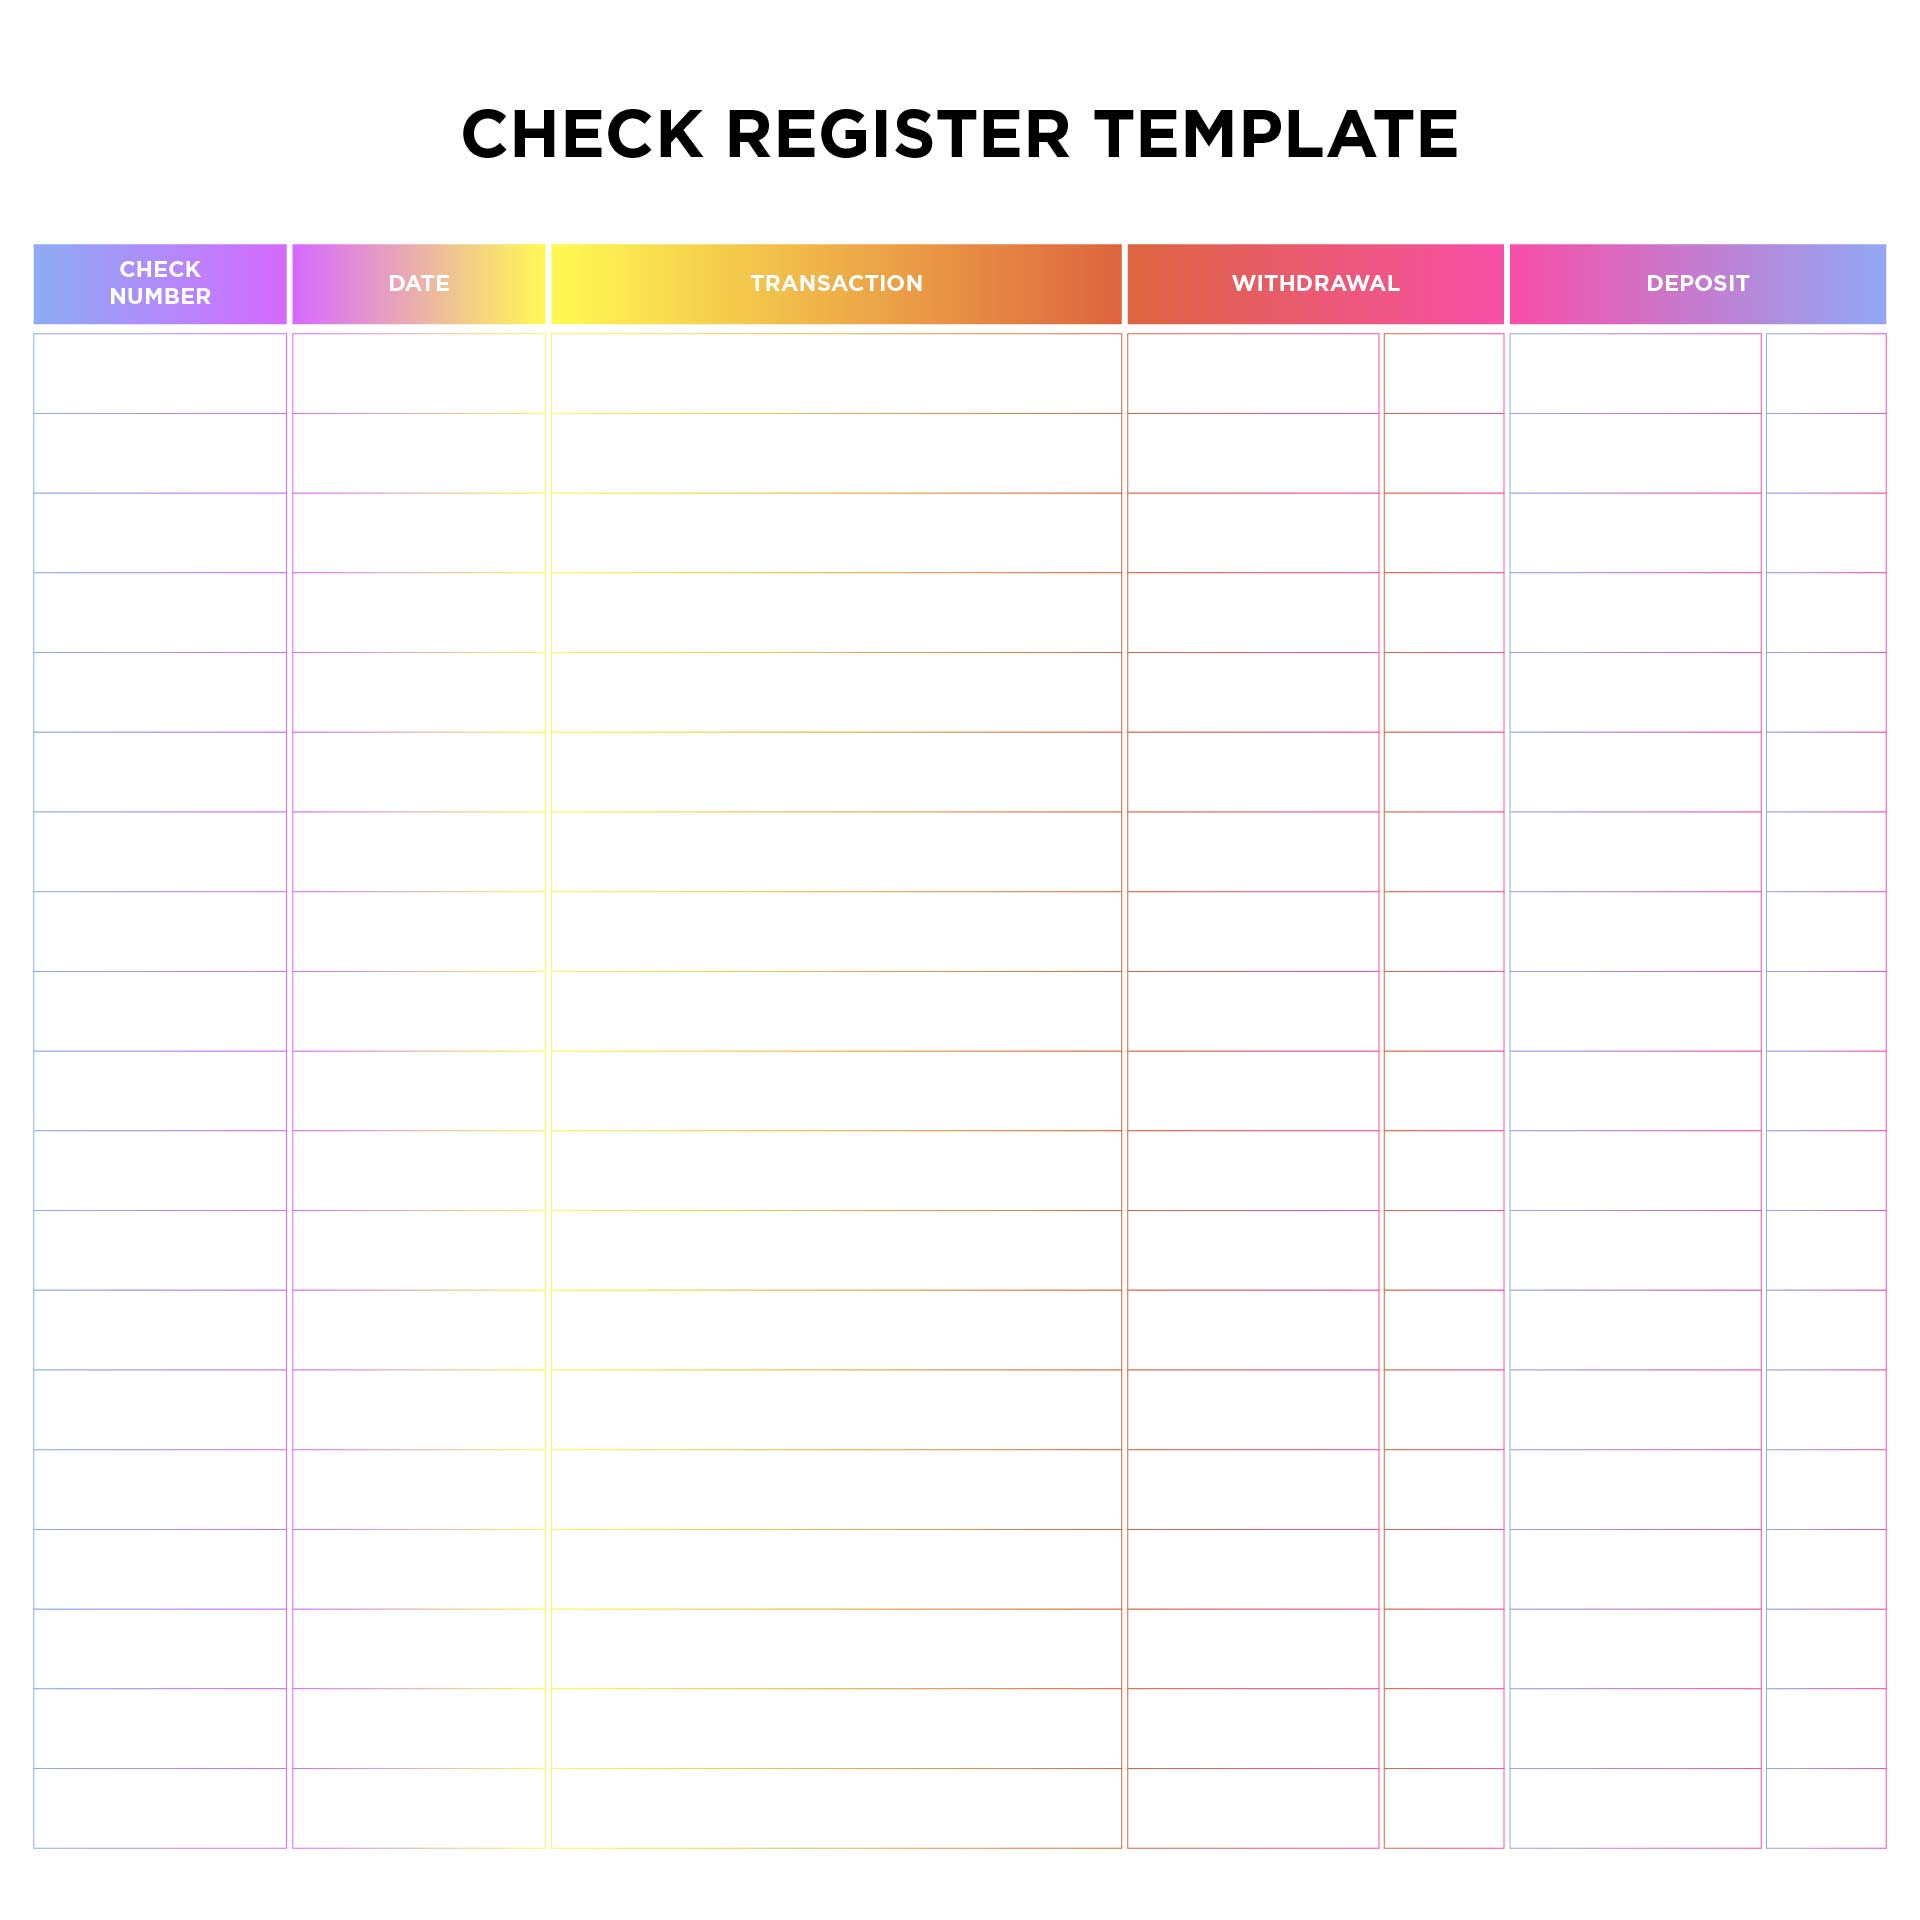 Printable Check Register Form Free - Printable Forms Free Online